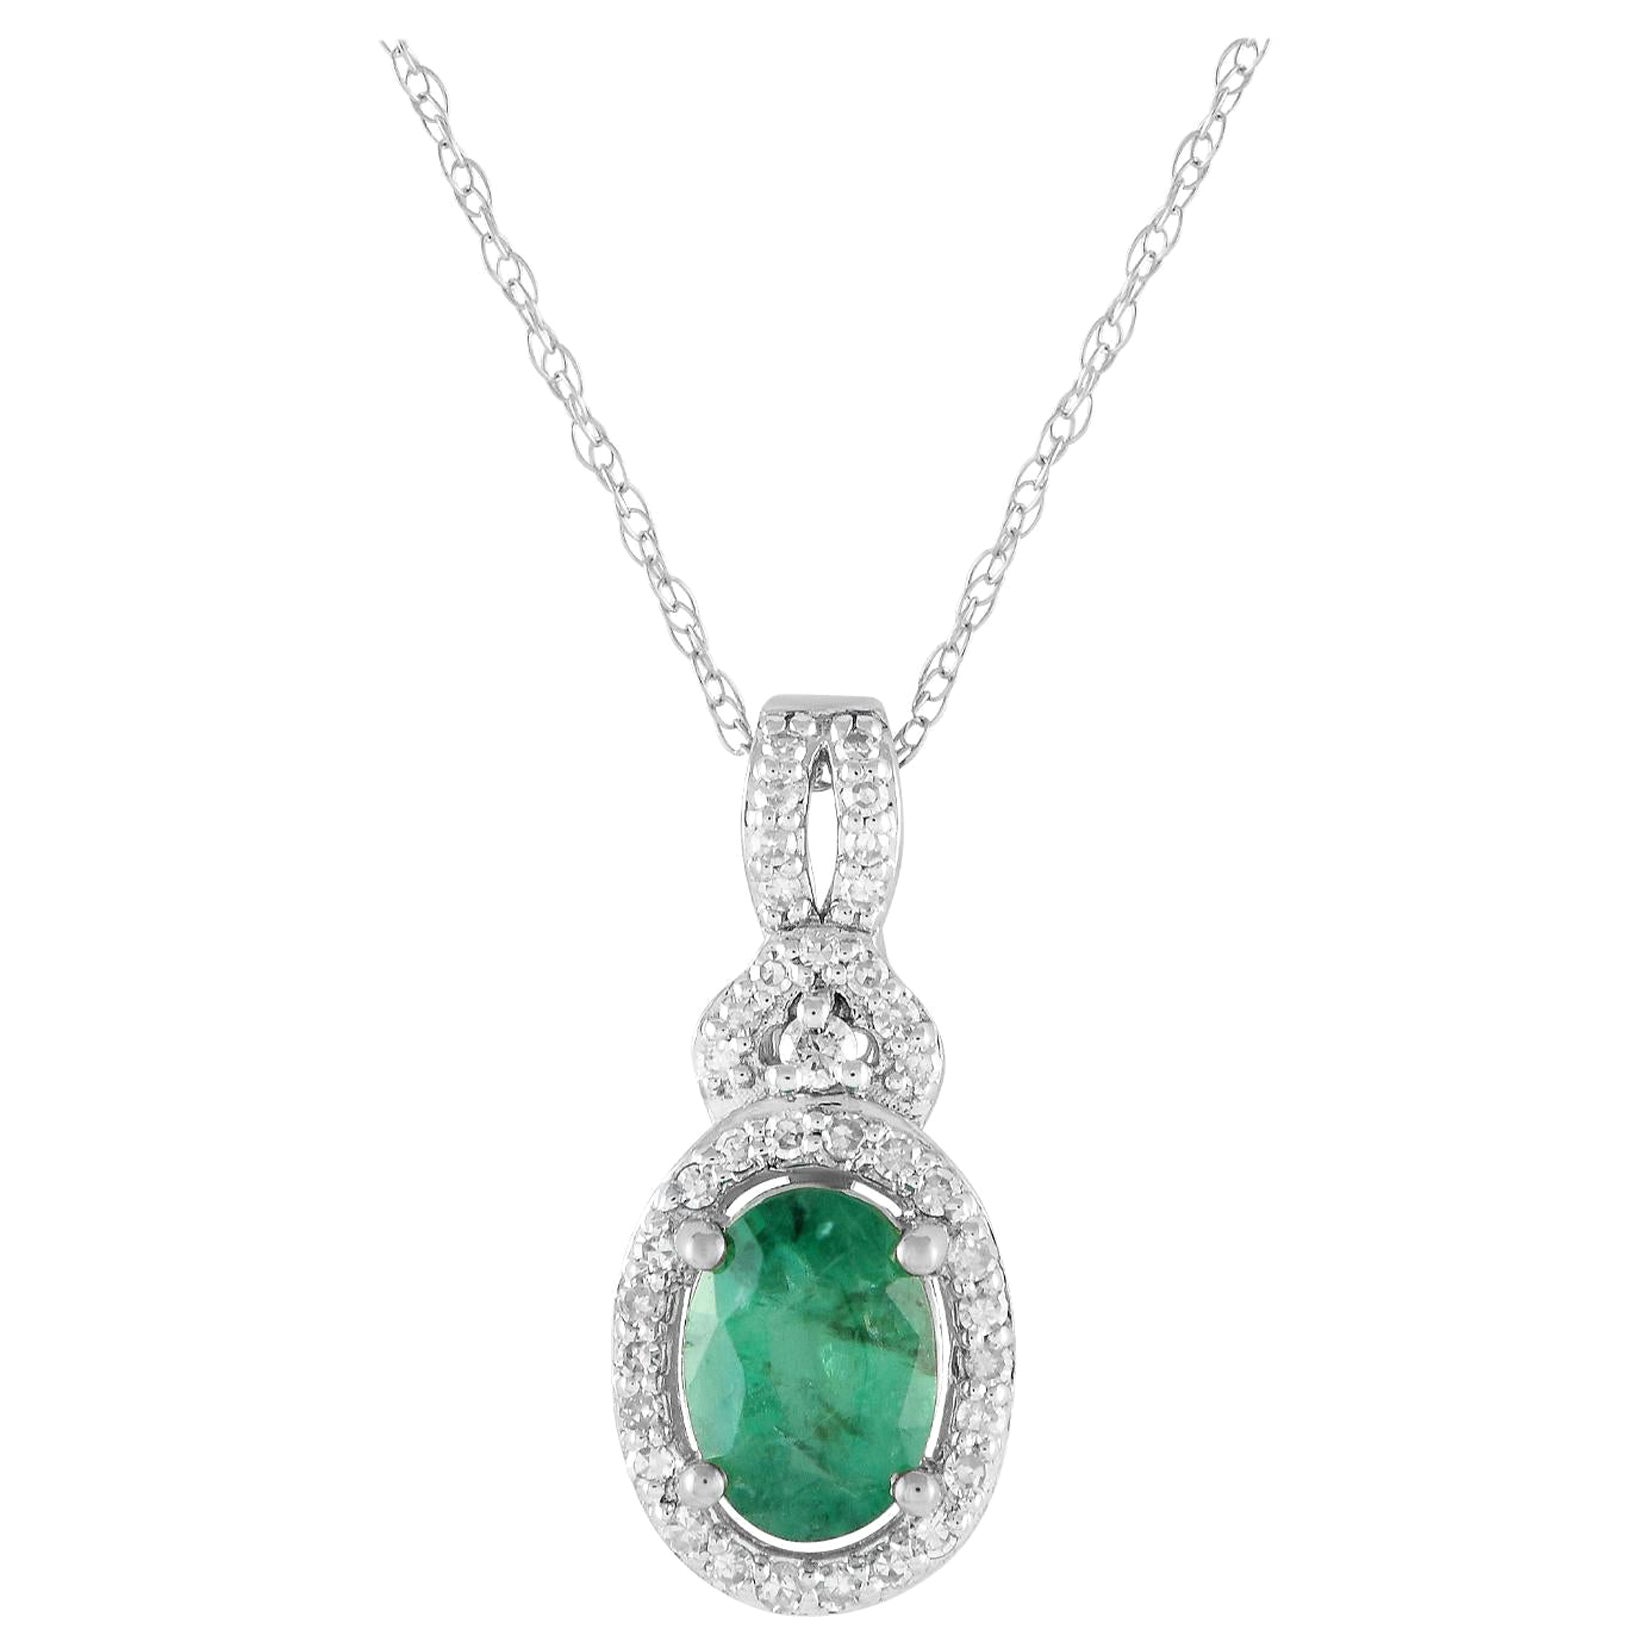 LB Exclusive 14K White Gold 0.15ct Diamond and Emerald Necklace PD4-15738WEM